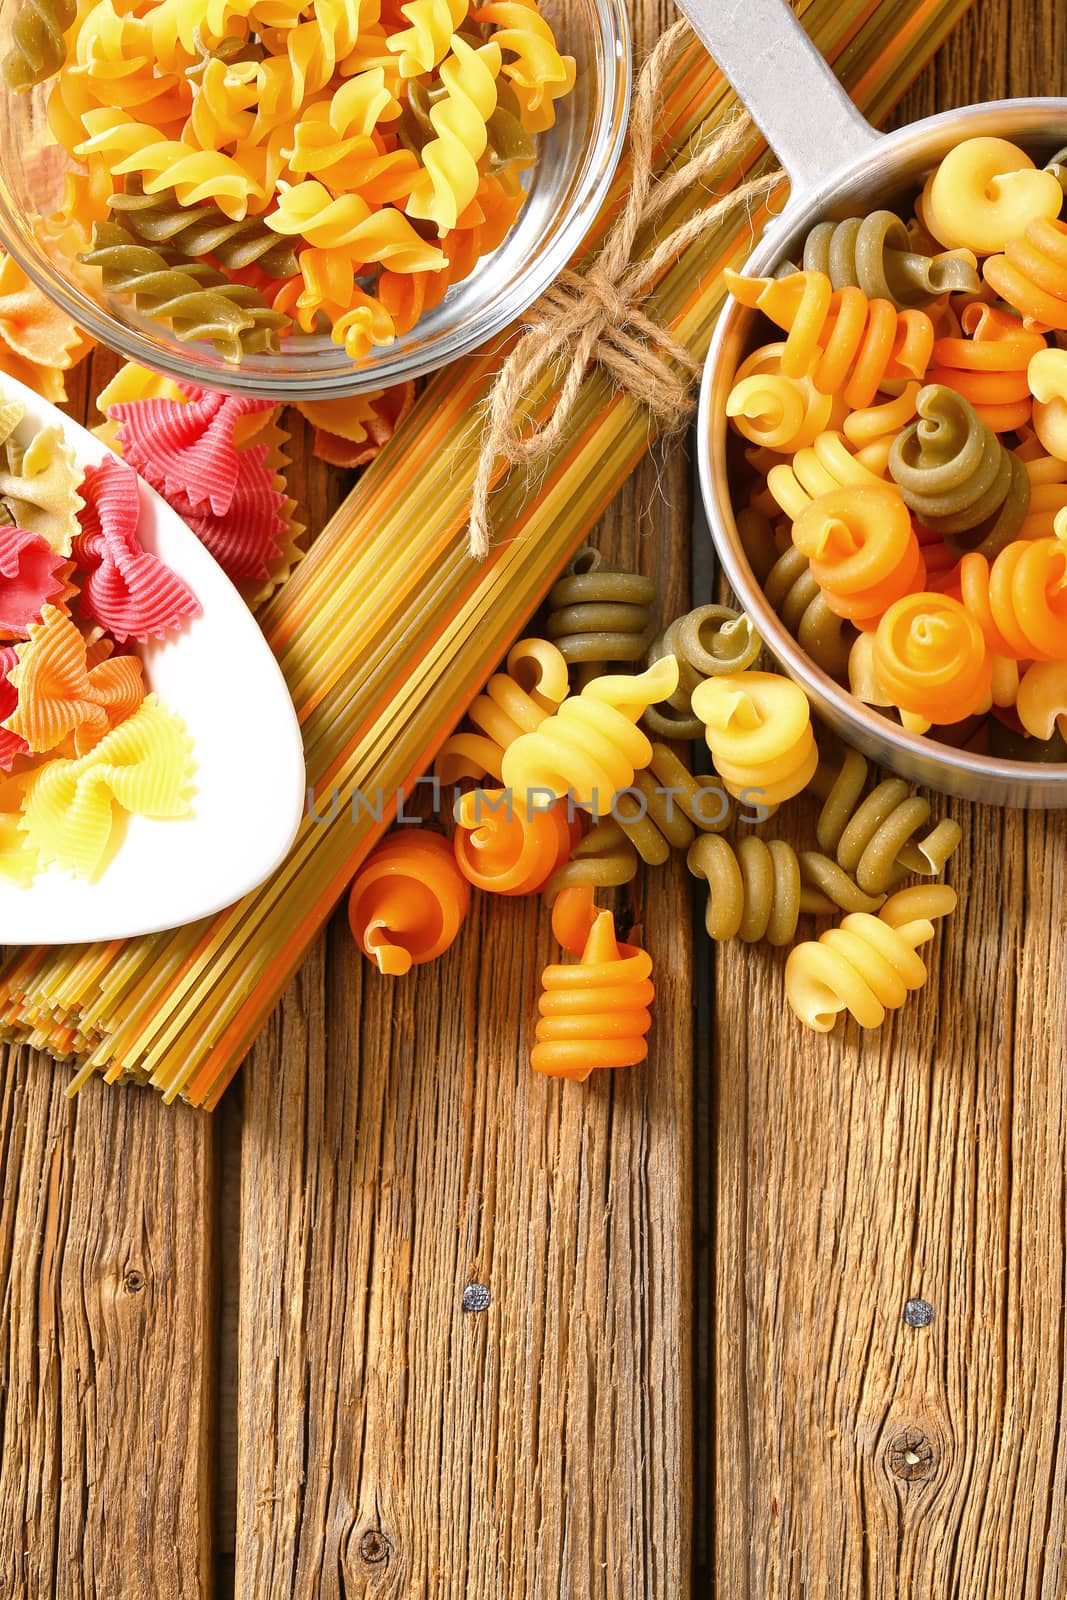 Various types of coloured pasta by Digifoodstock